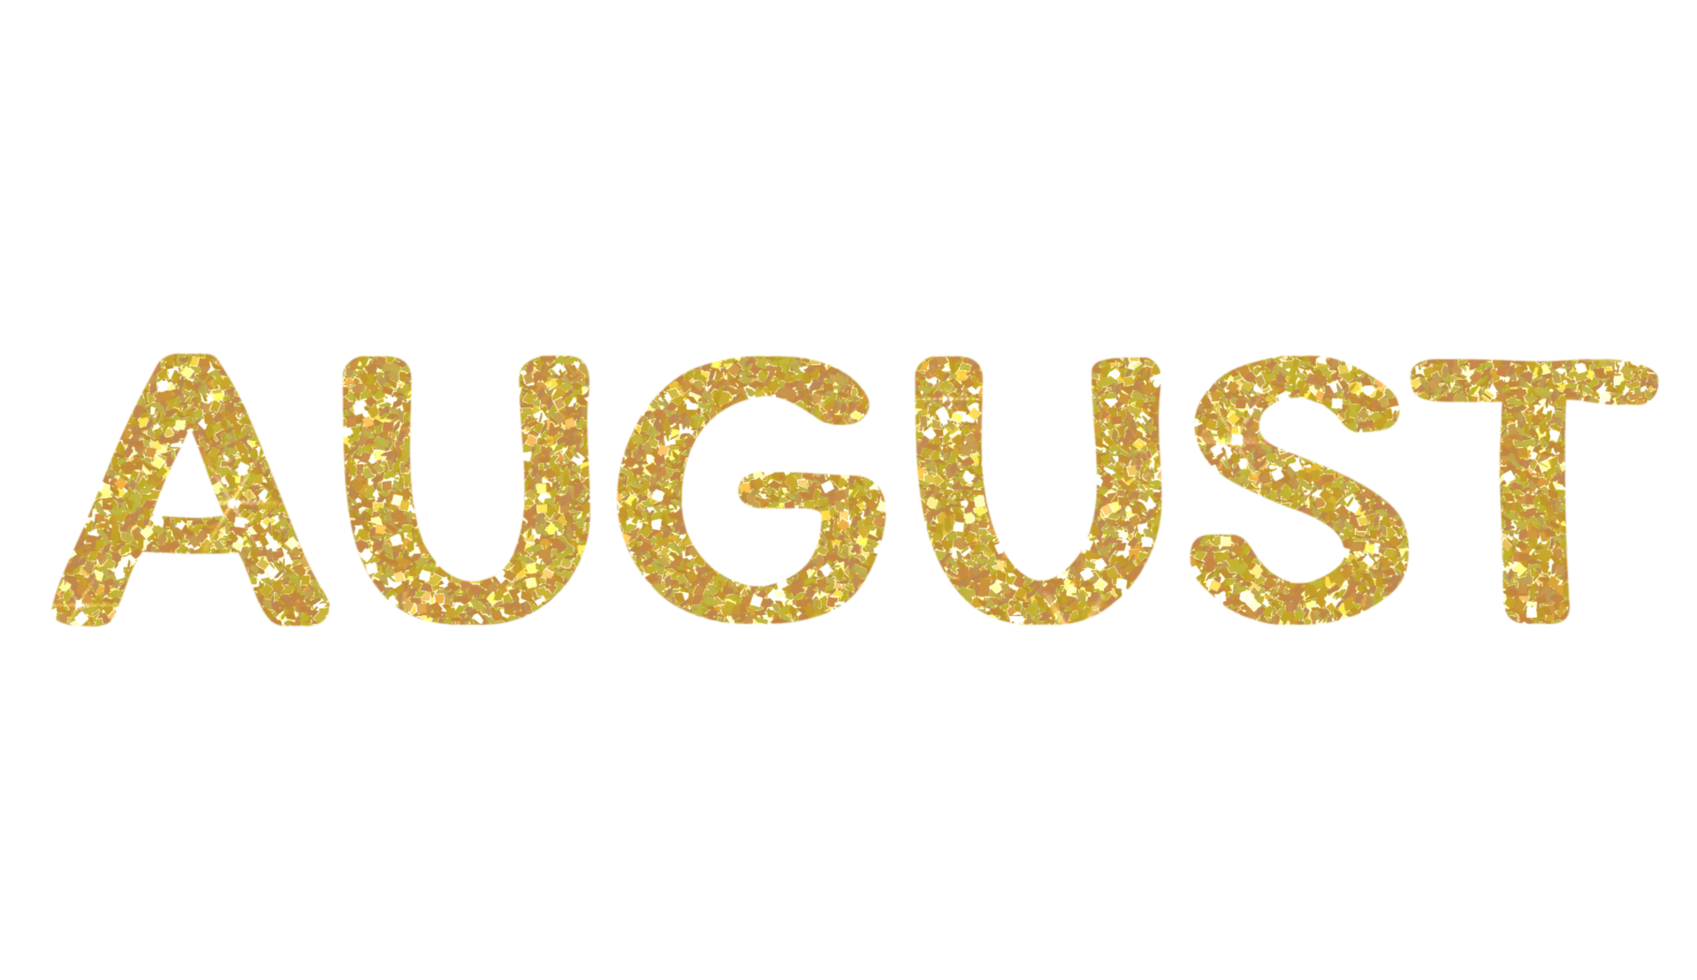 Golden glitter AUGUST Letters Icon. August sign. Design for decorating, background, wallpaper, illustration. png